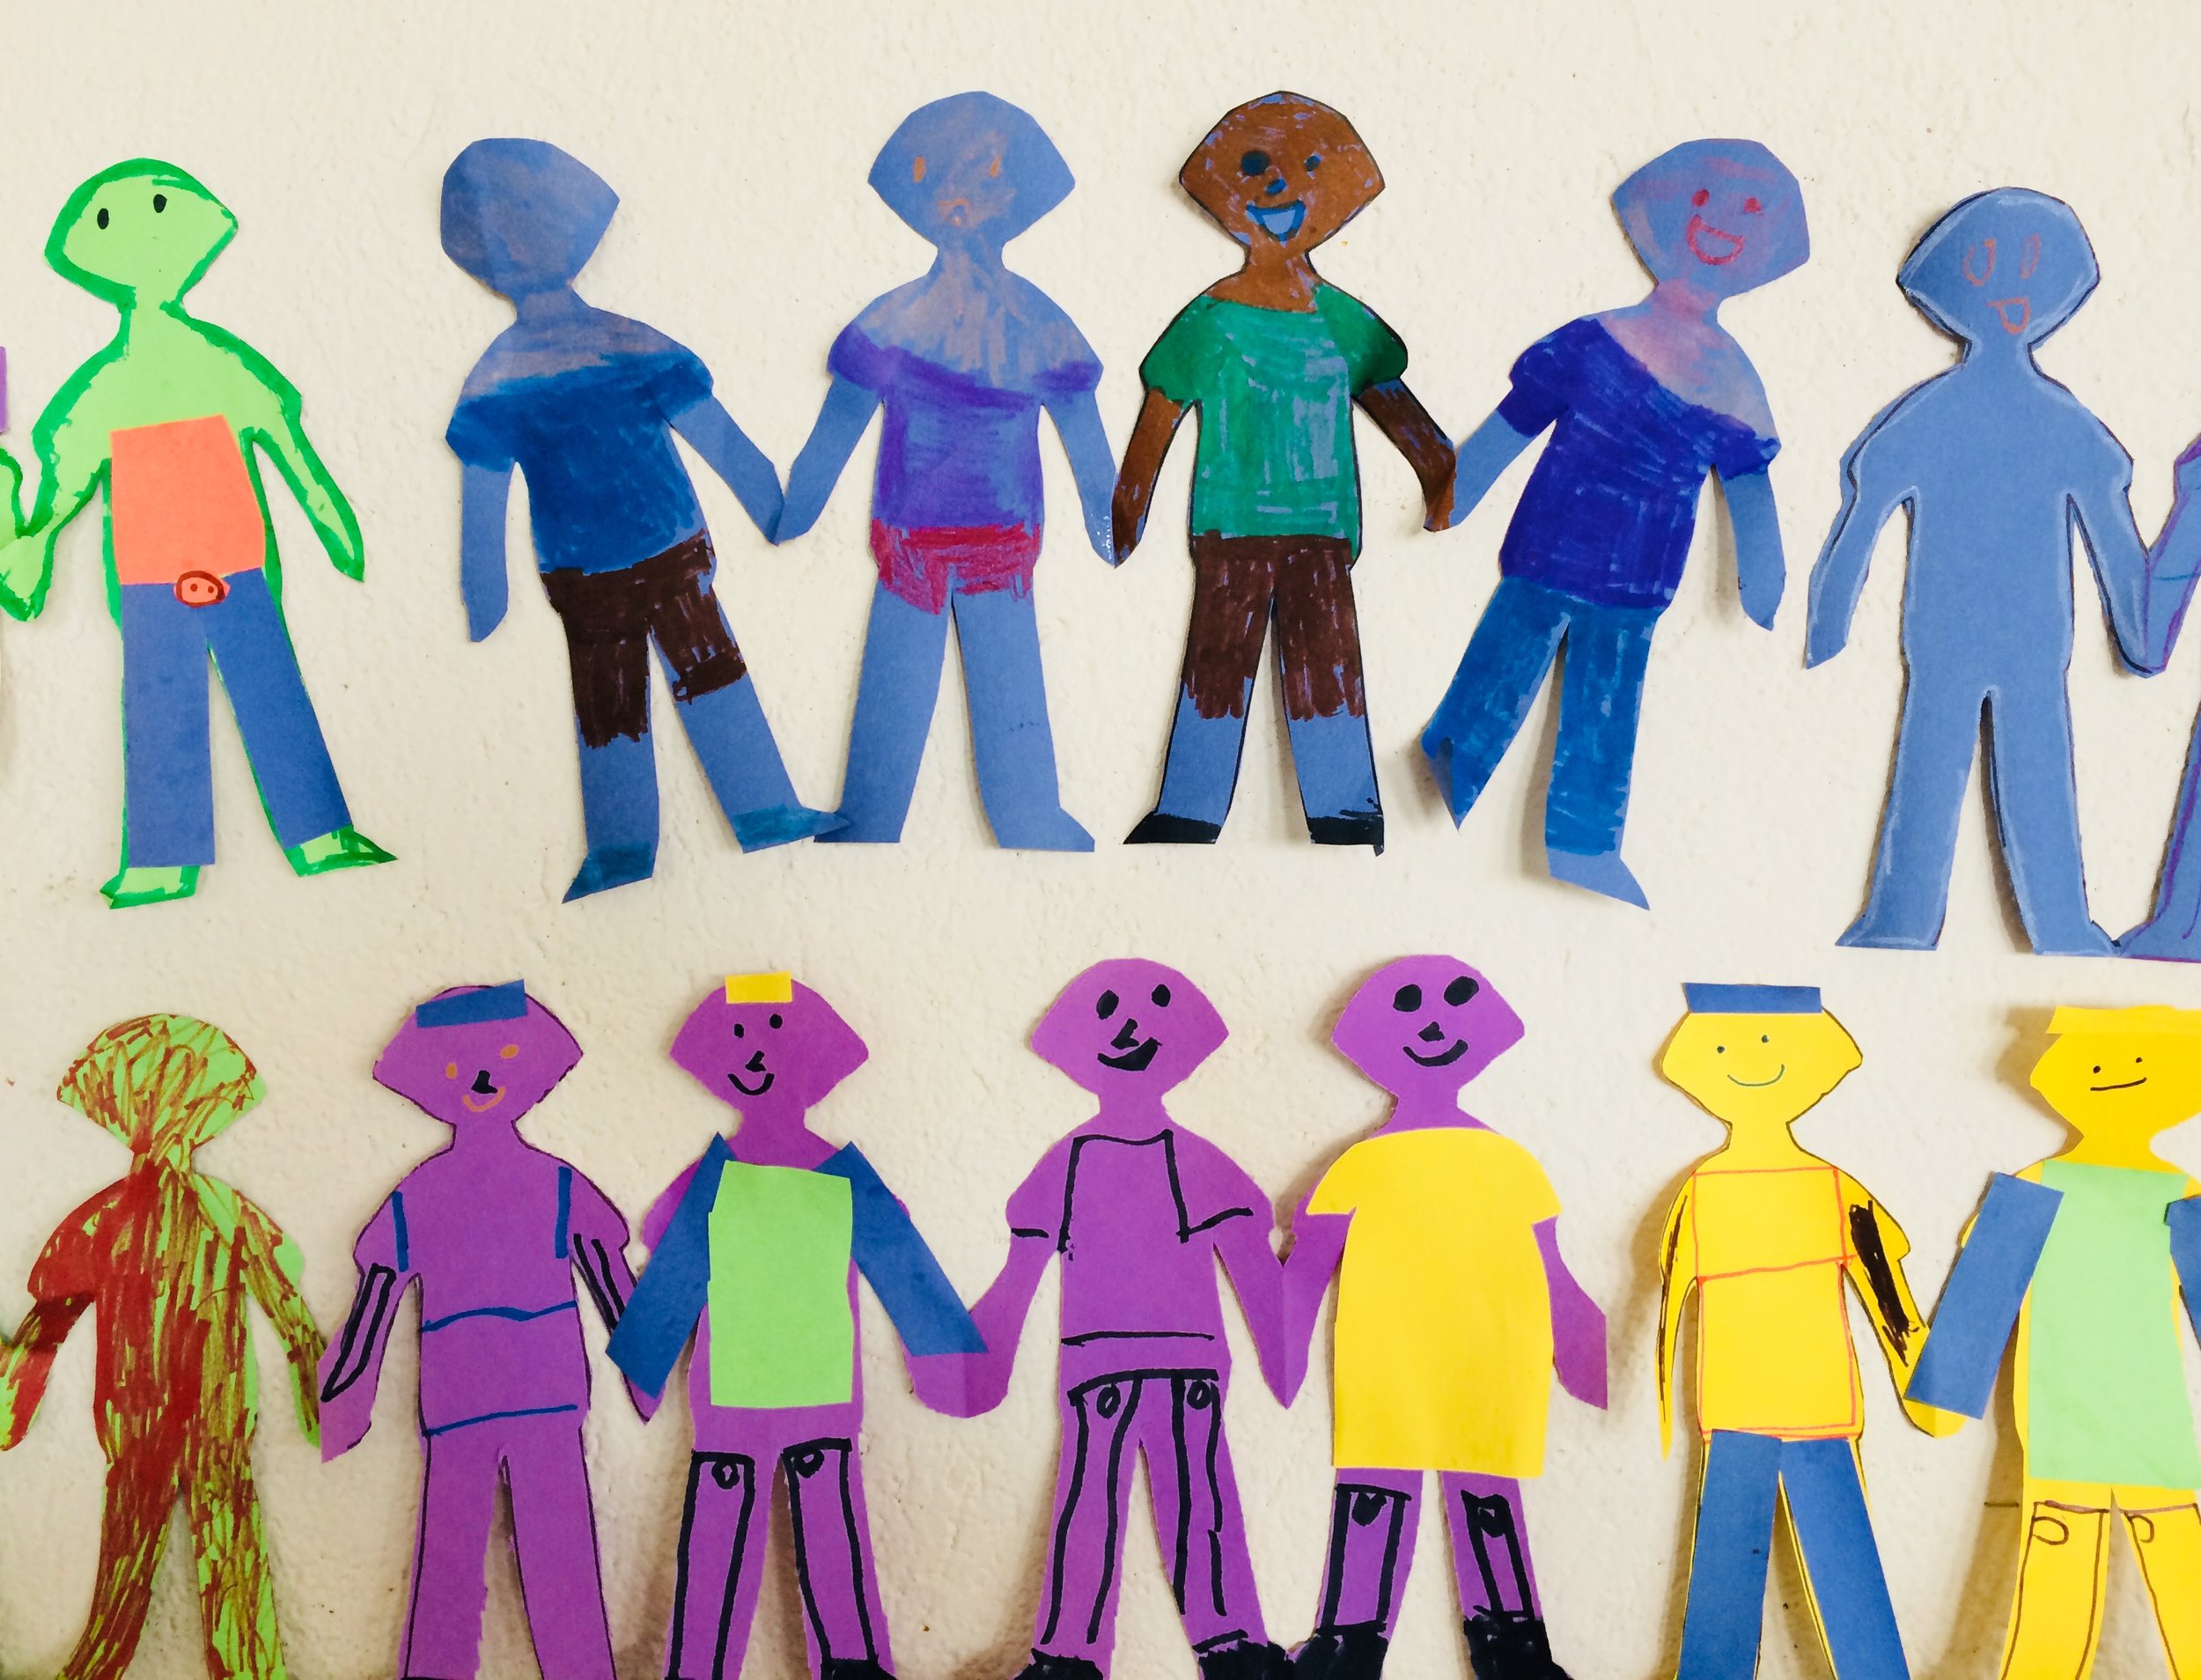 Paper dolls displaying the people of the world